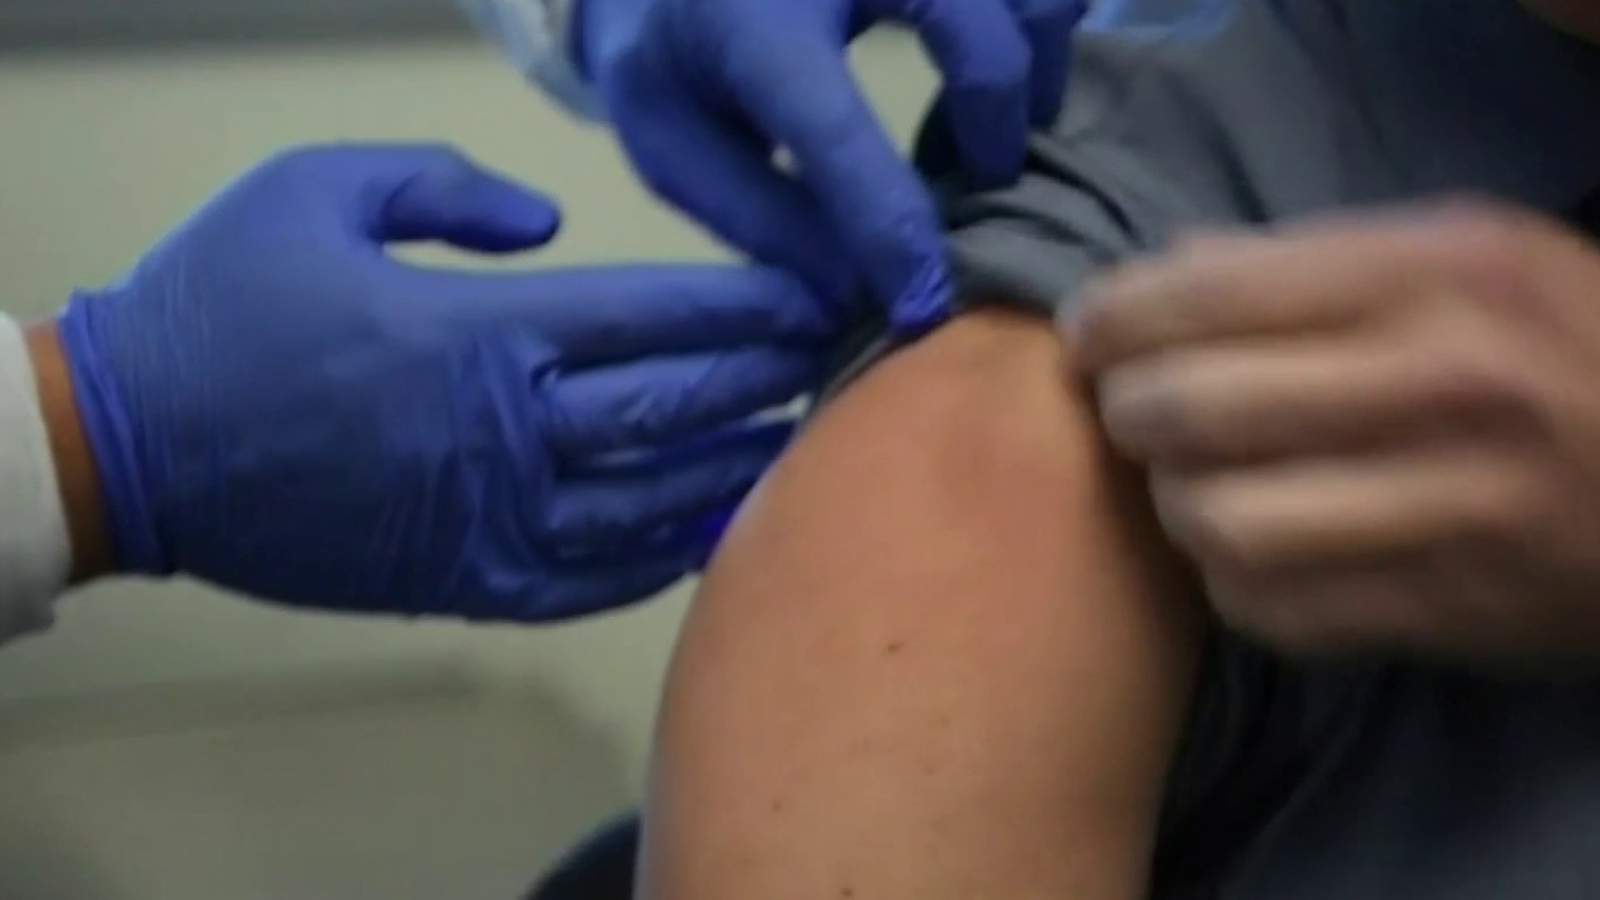 Officials believe more than 20M people could get first COVID-19 vaccine dose by end of year